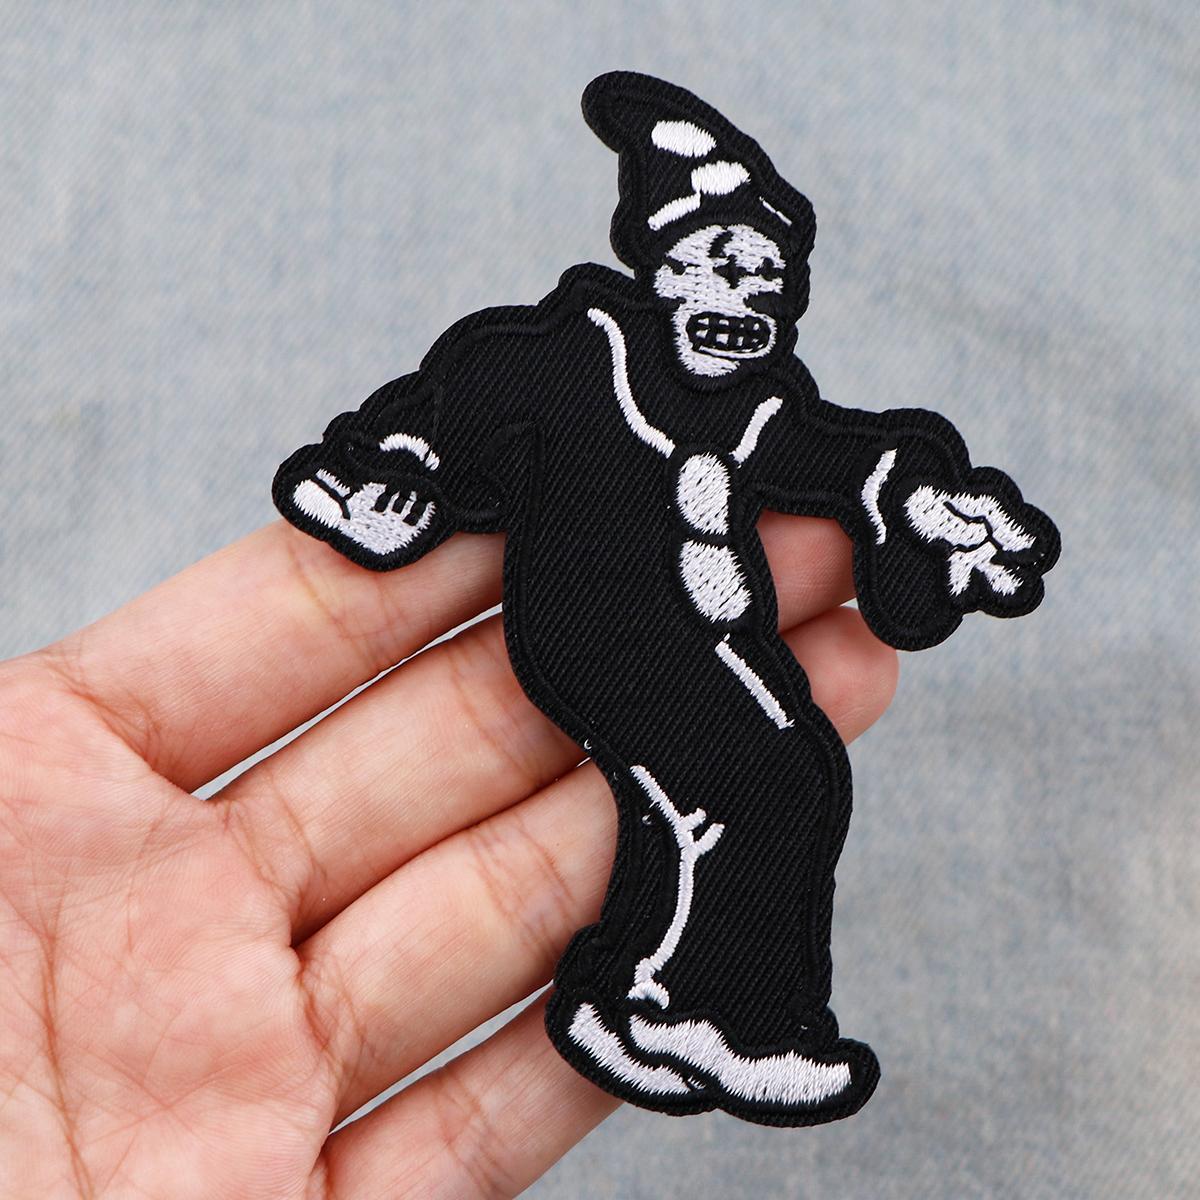 1pc Funny Car Patch For Clothes, Cute Cartoon Embroidery Patch For Men,  Clothing Accessories Decoration